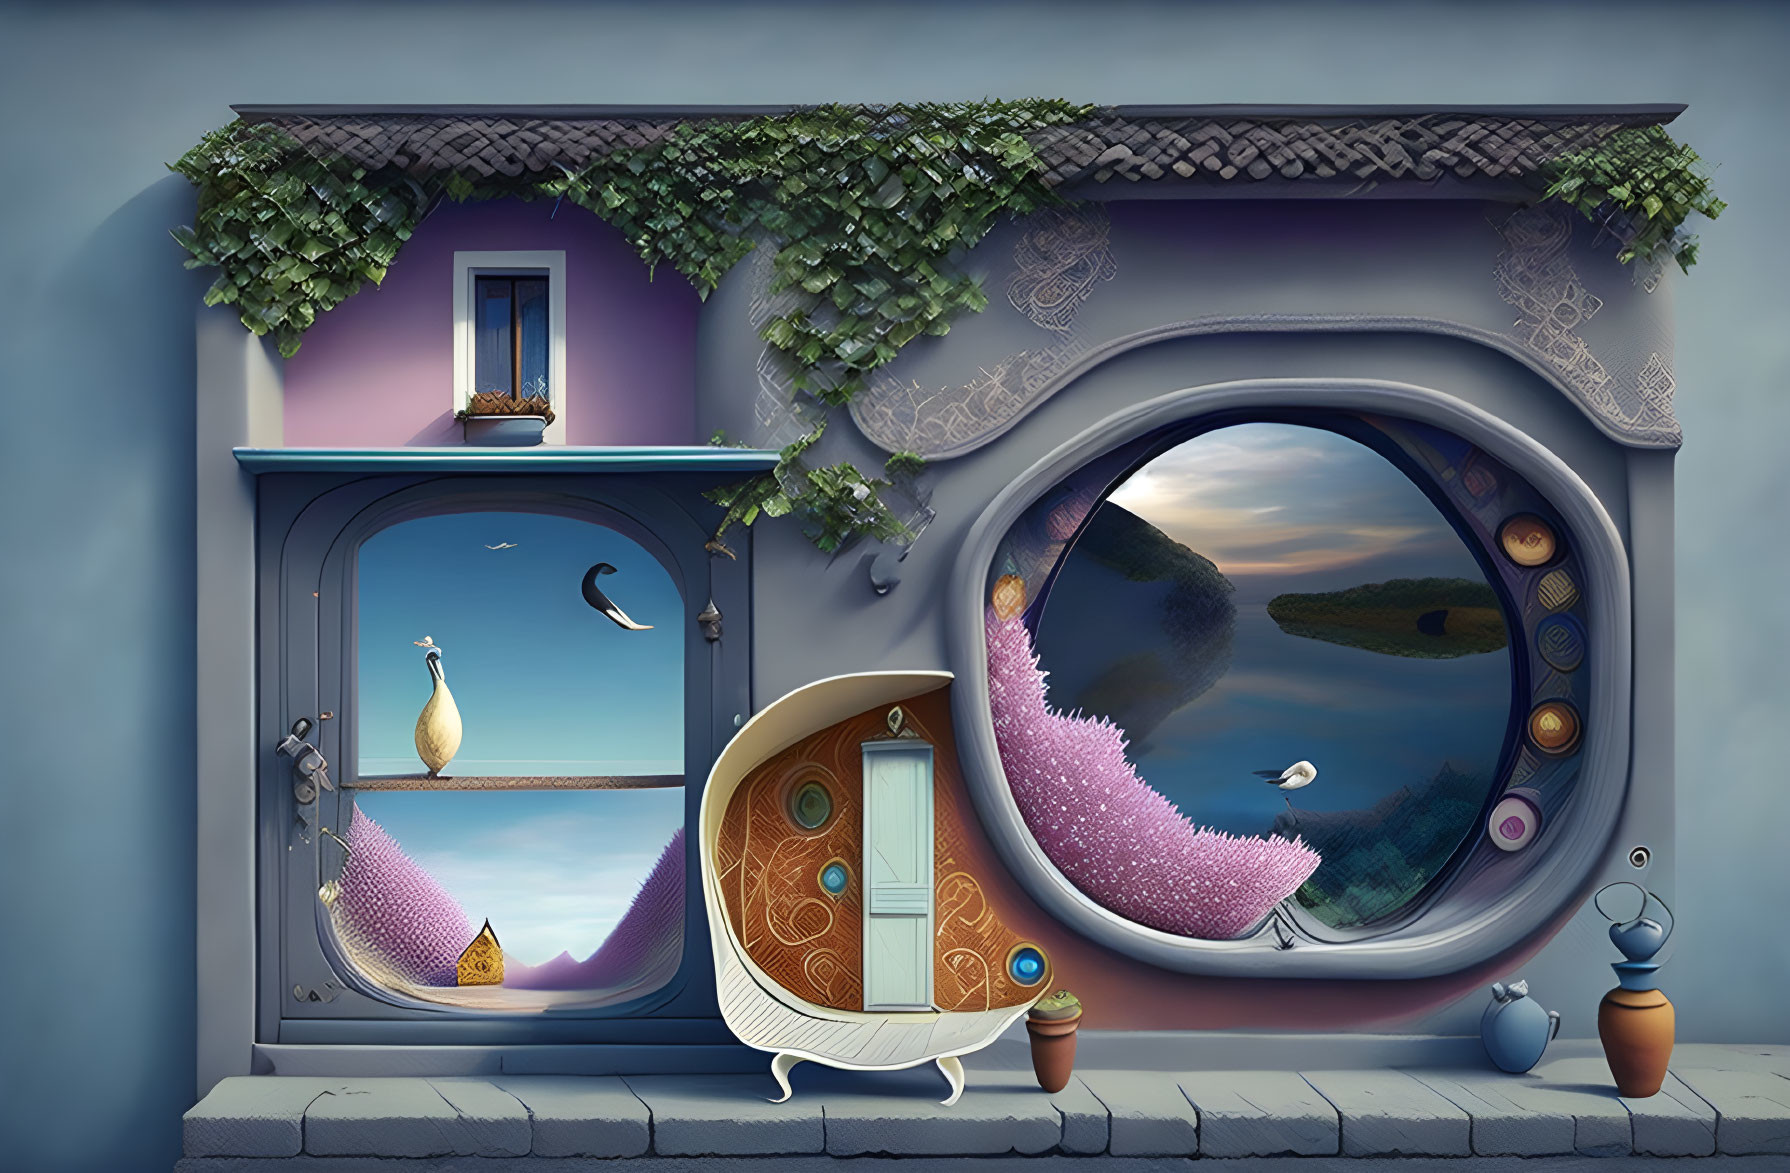 Whimsical illustration of room with oval window, peacock on purple chair, surreal blend of indoor